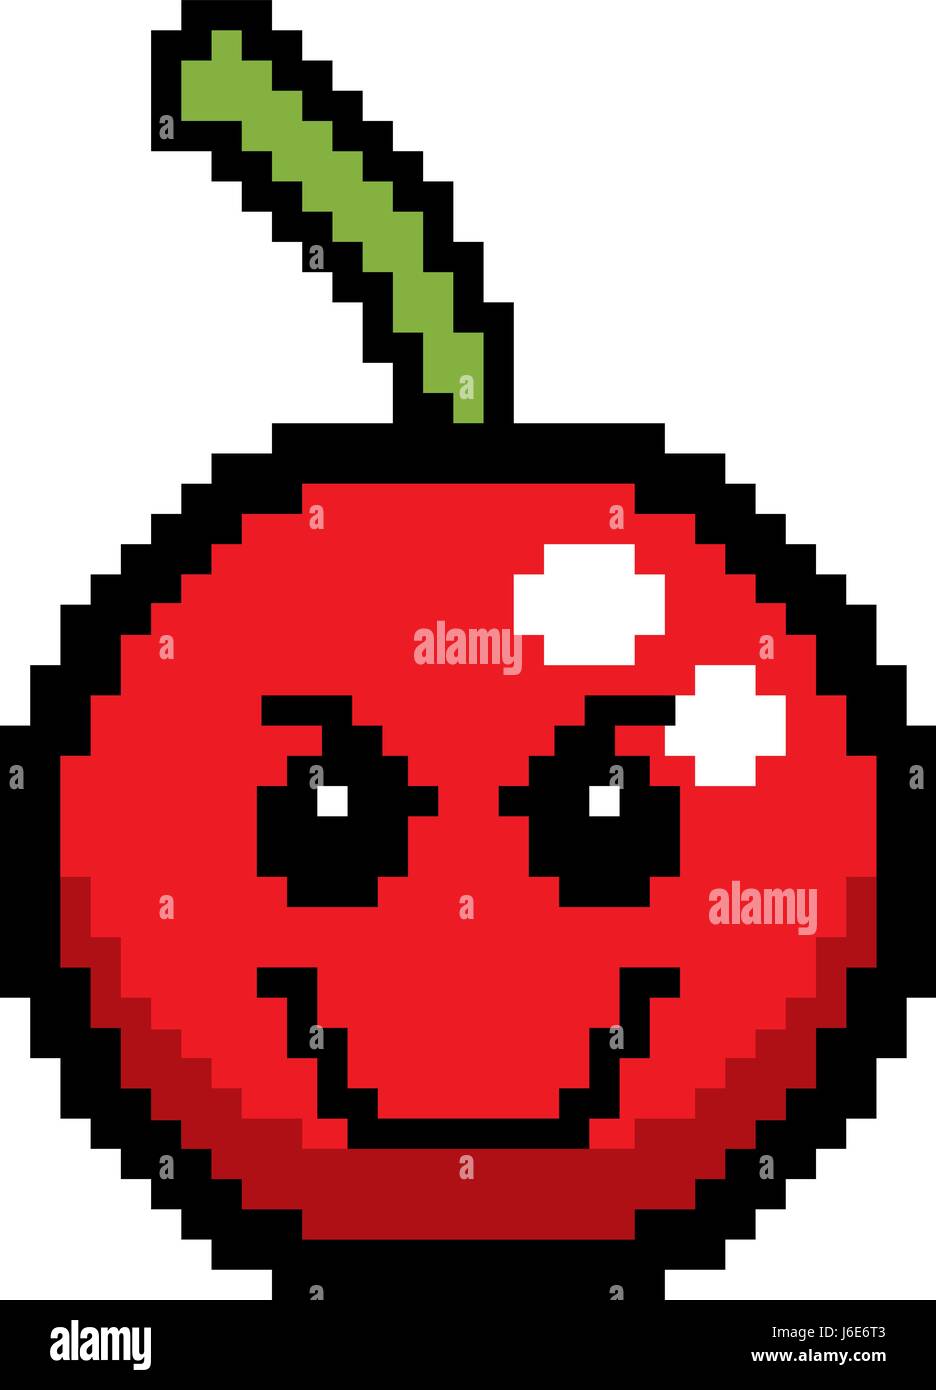 An illustration of a cherry looking evil in an 8-bit cartoon style ...